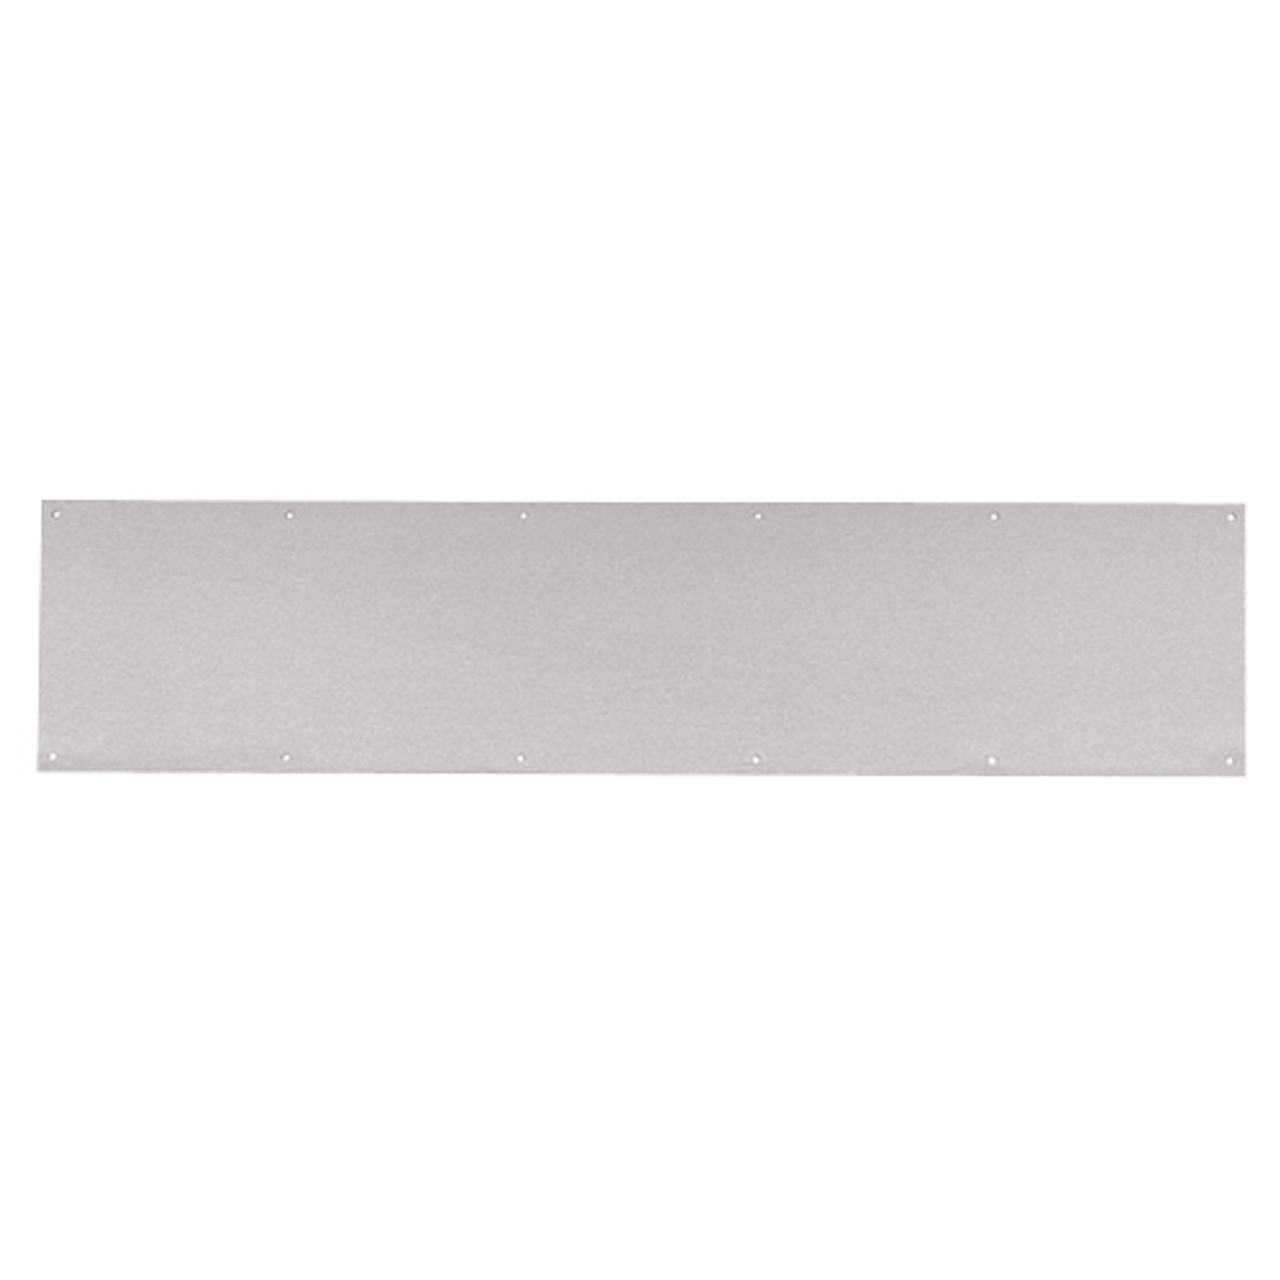 8400-US32D-4x38-B-CS Ives 8400 Series Protection Plate in Satin Stainless Steel